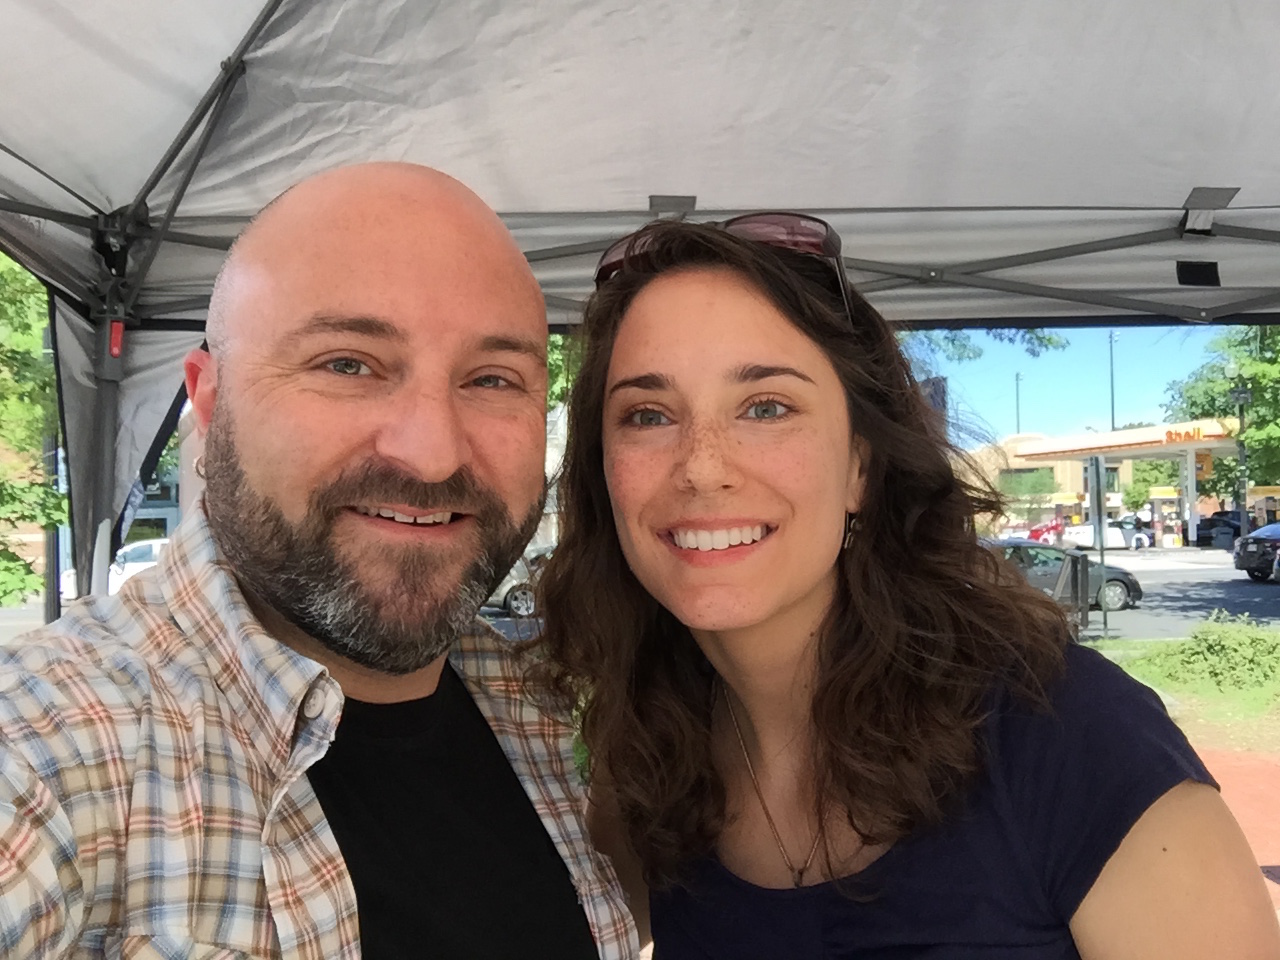   Maria Mandle from CreativeCouchDesigns poses for a selfie with Drew at the Petworth Community Market, 5/23/15  